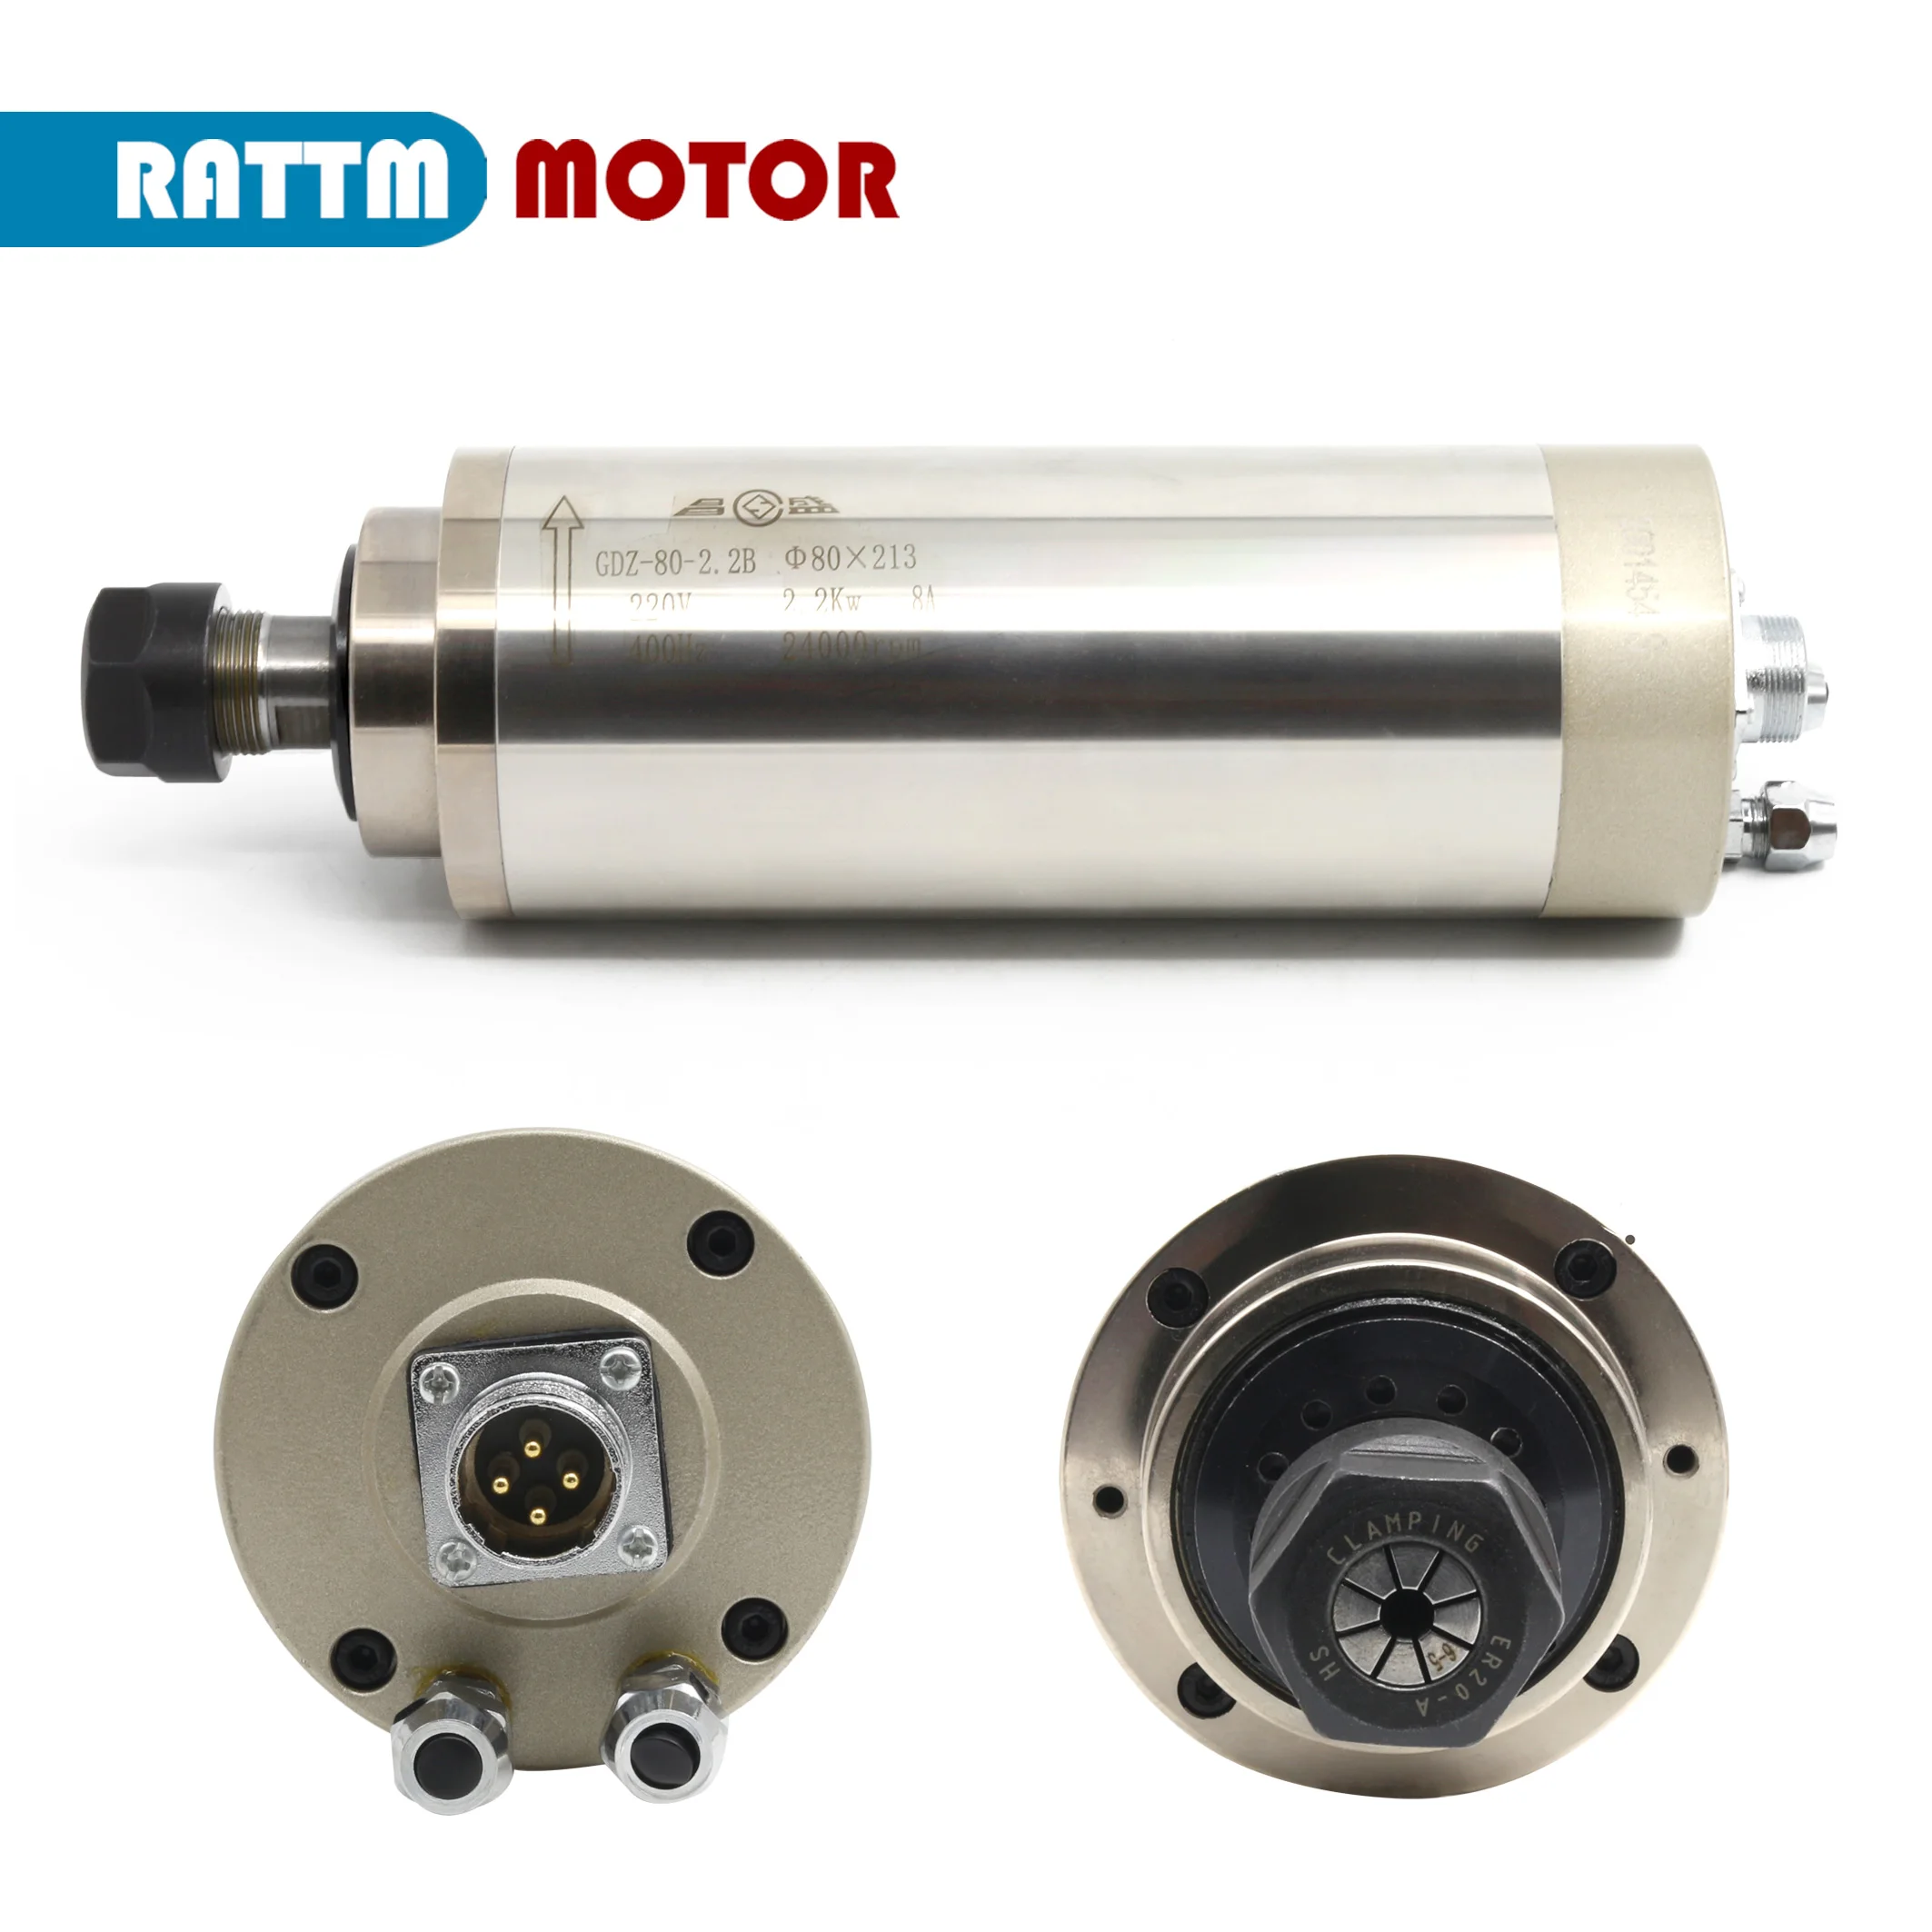 EU / US2.2KW Water cooled spindle motor ER20 8A 80x213mm runout off 0.01mm for CNC router milling machine